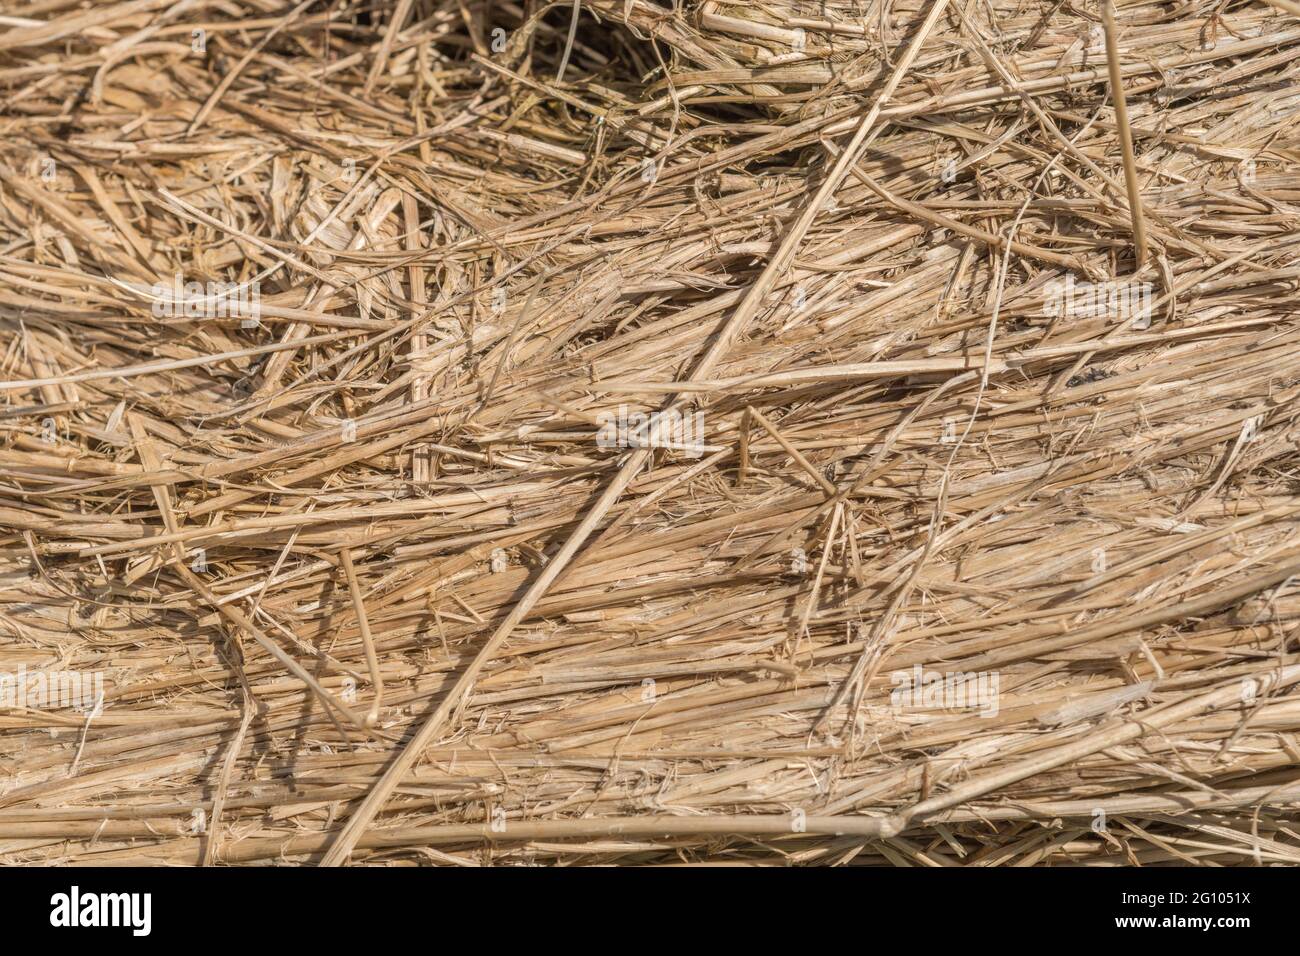 Close up straw texture of round hay bale that has been broken open. Shows layers of compressed straw. For animal feed, agriculture and farming UK. Stock Photo